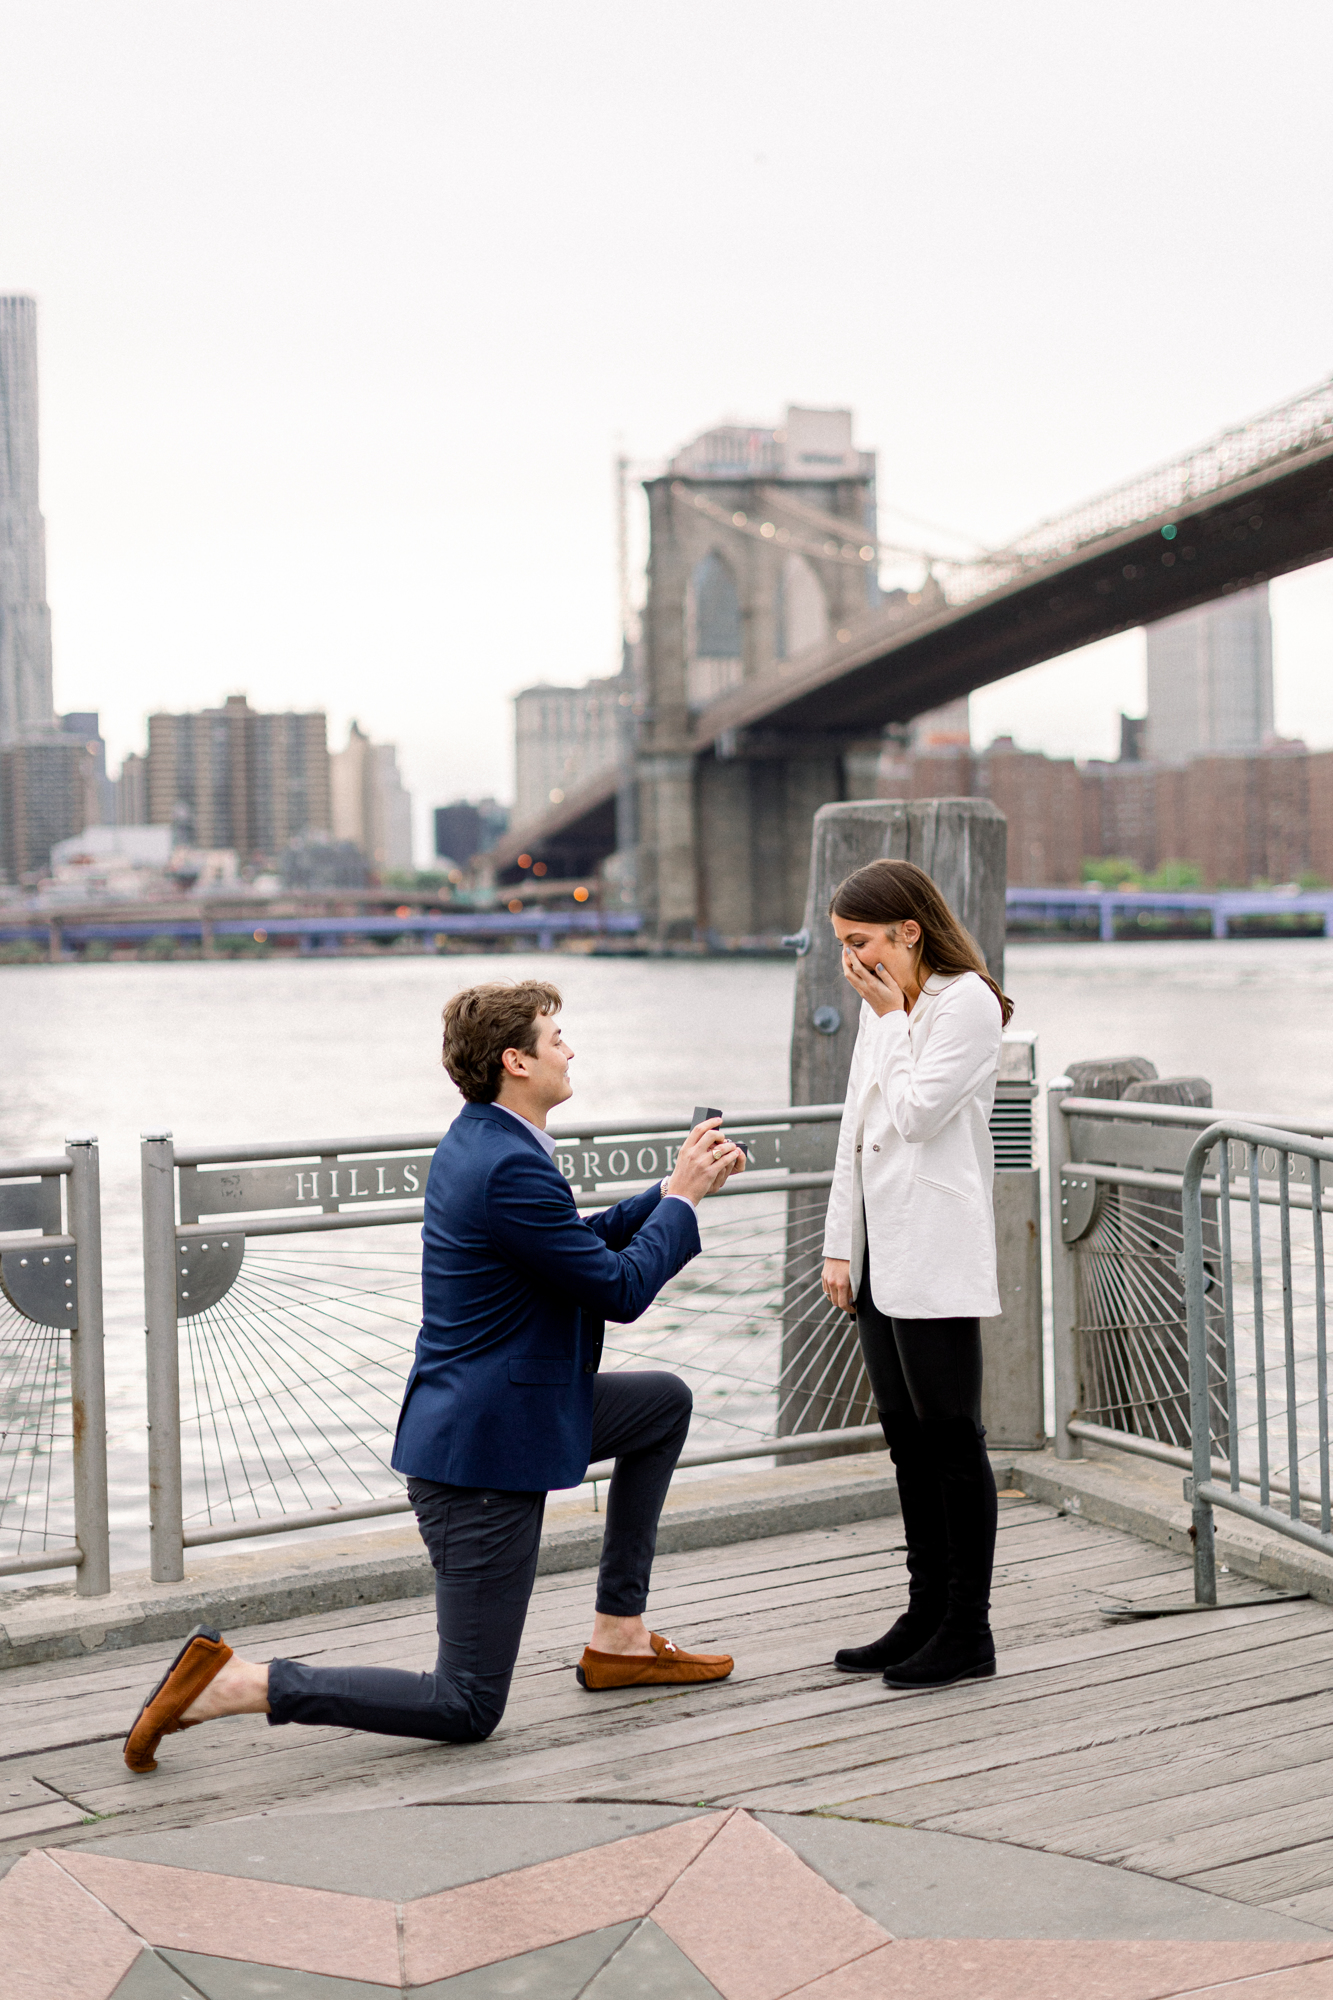 Timeless DUMBO Proposal Photos Featuring the Brooklyn Bridge